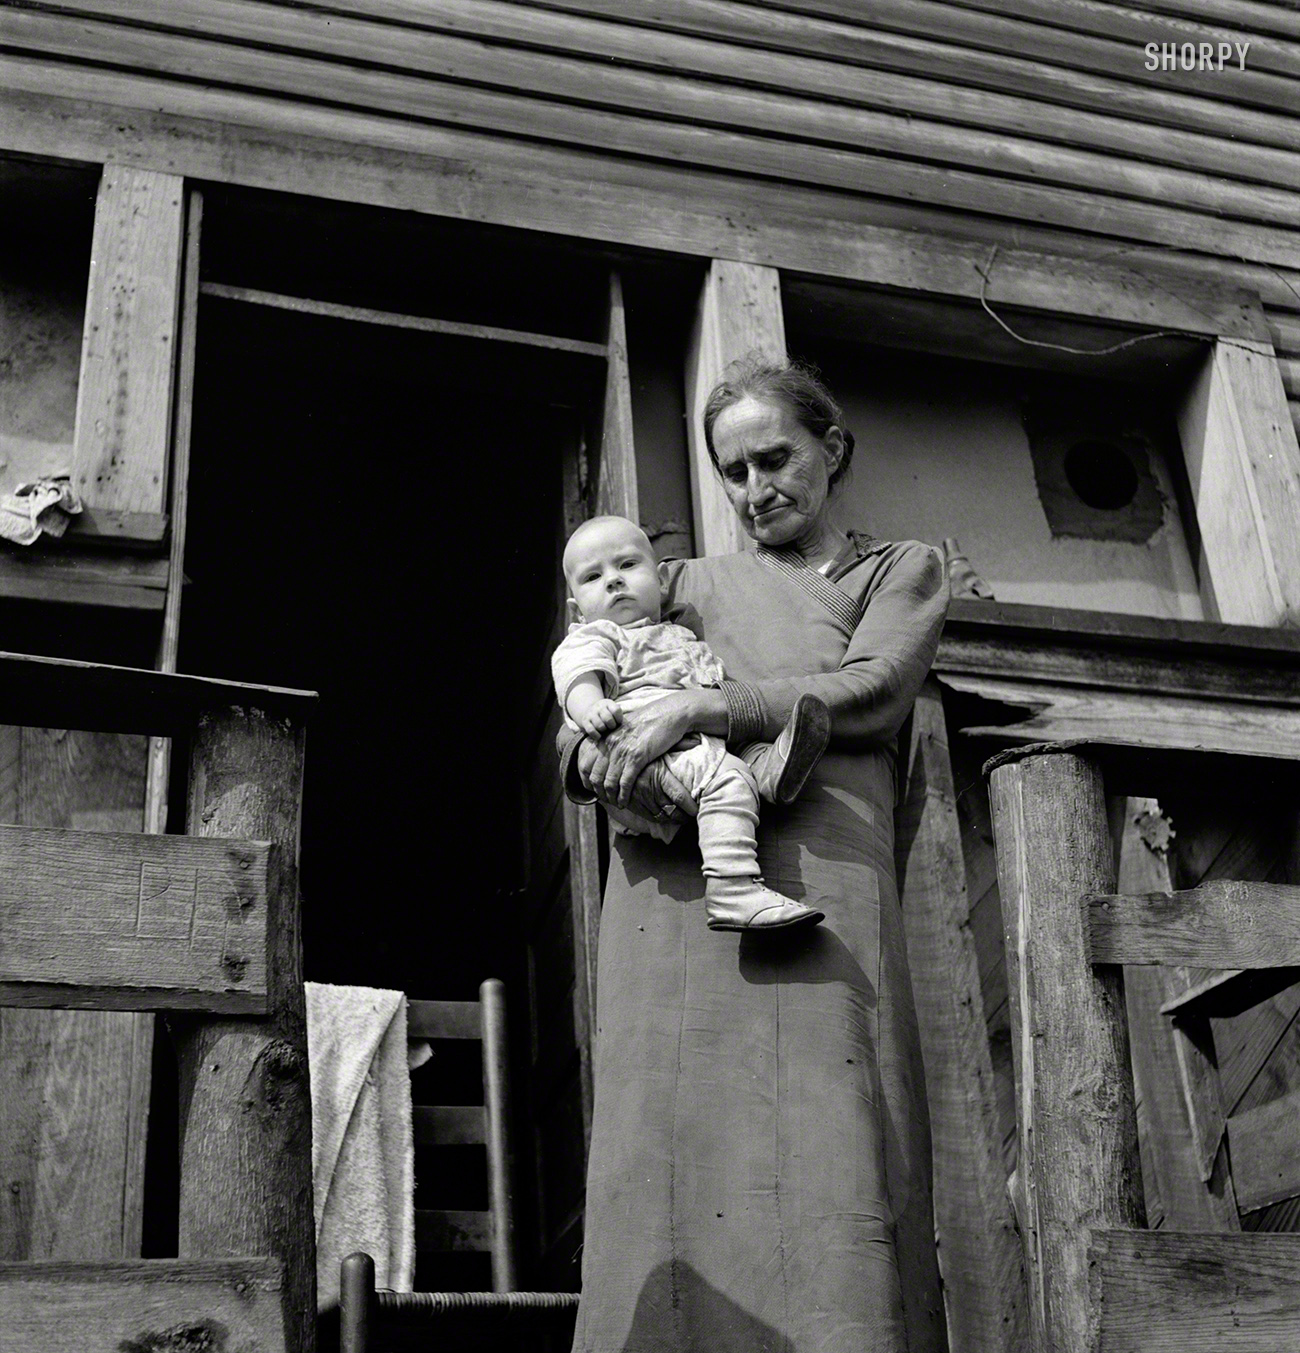 September 1938. "Mother-in-law of unemployed coal miner and his child. Marine, West Virginia." Photo by Marion Post Wolcott. View full size.